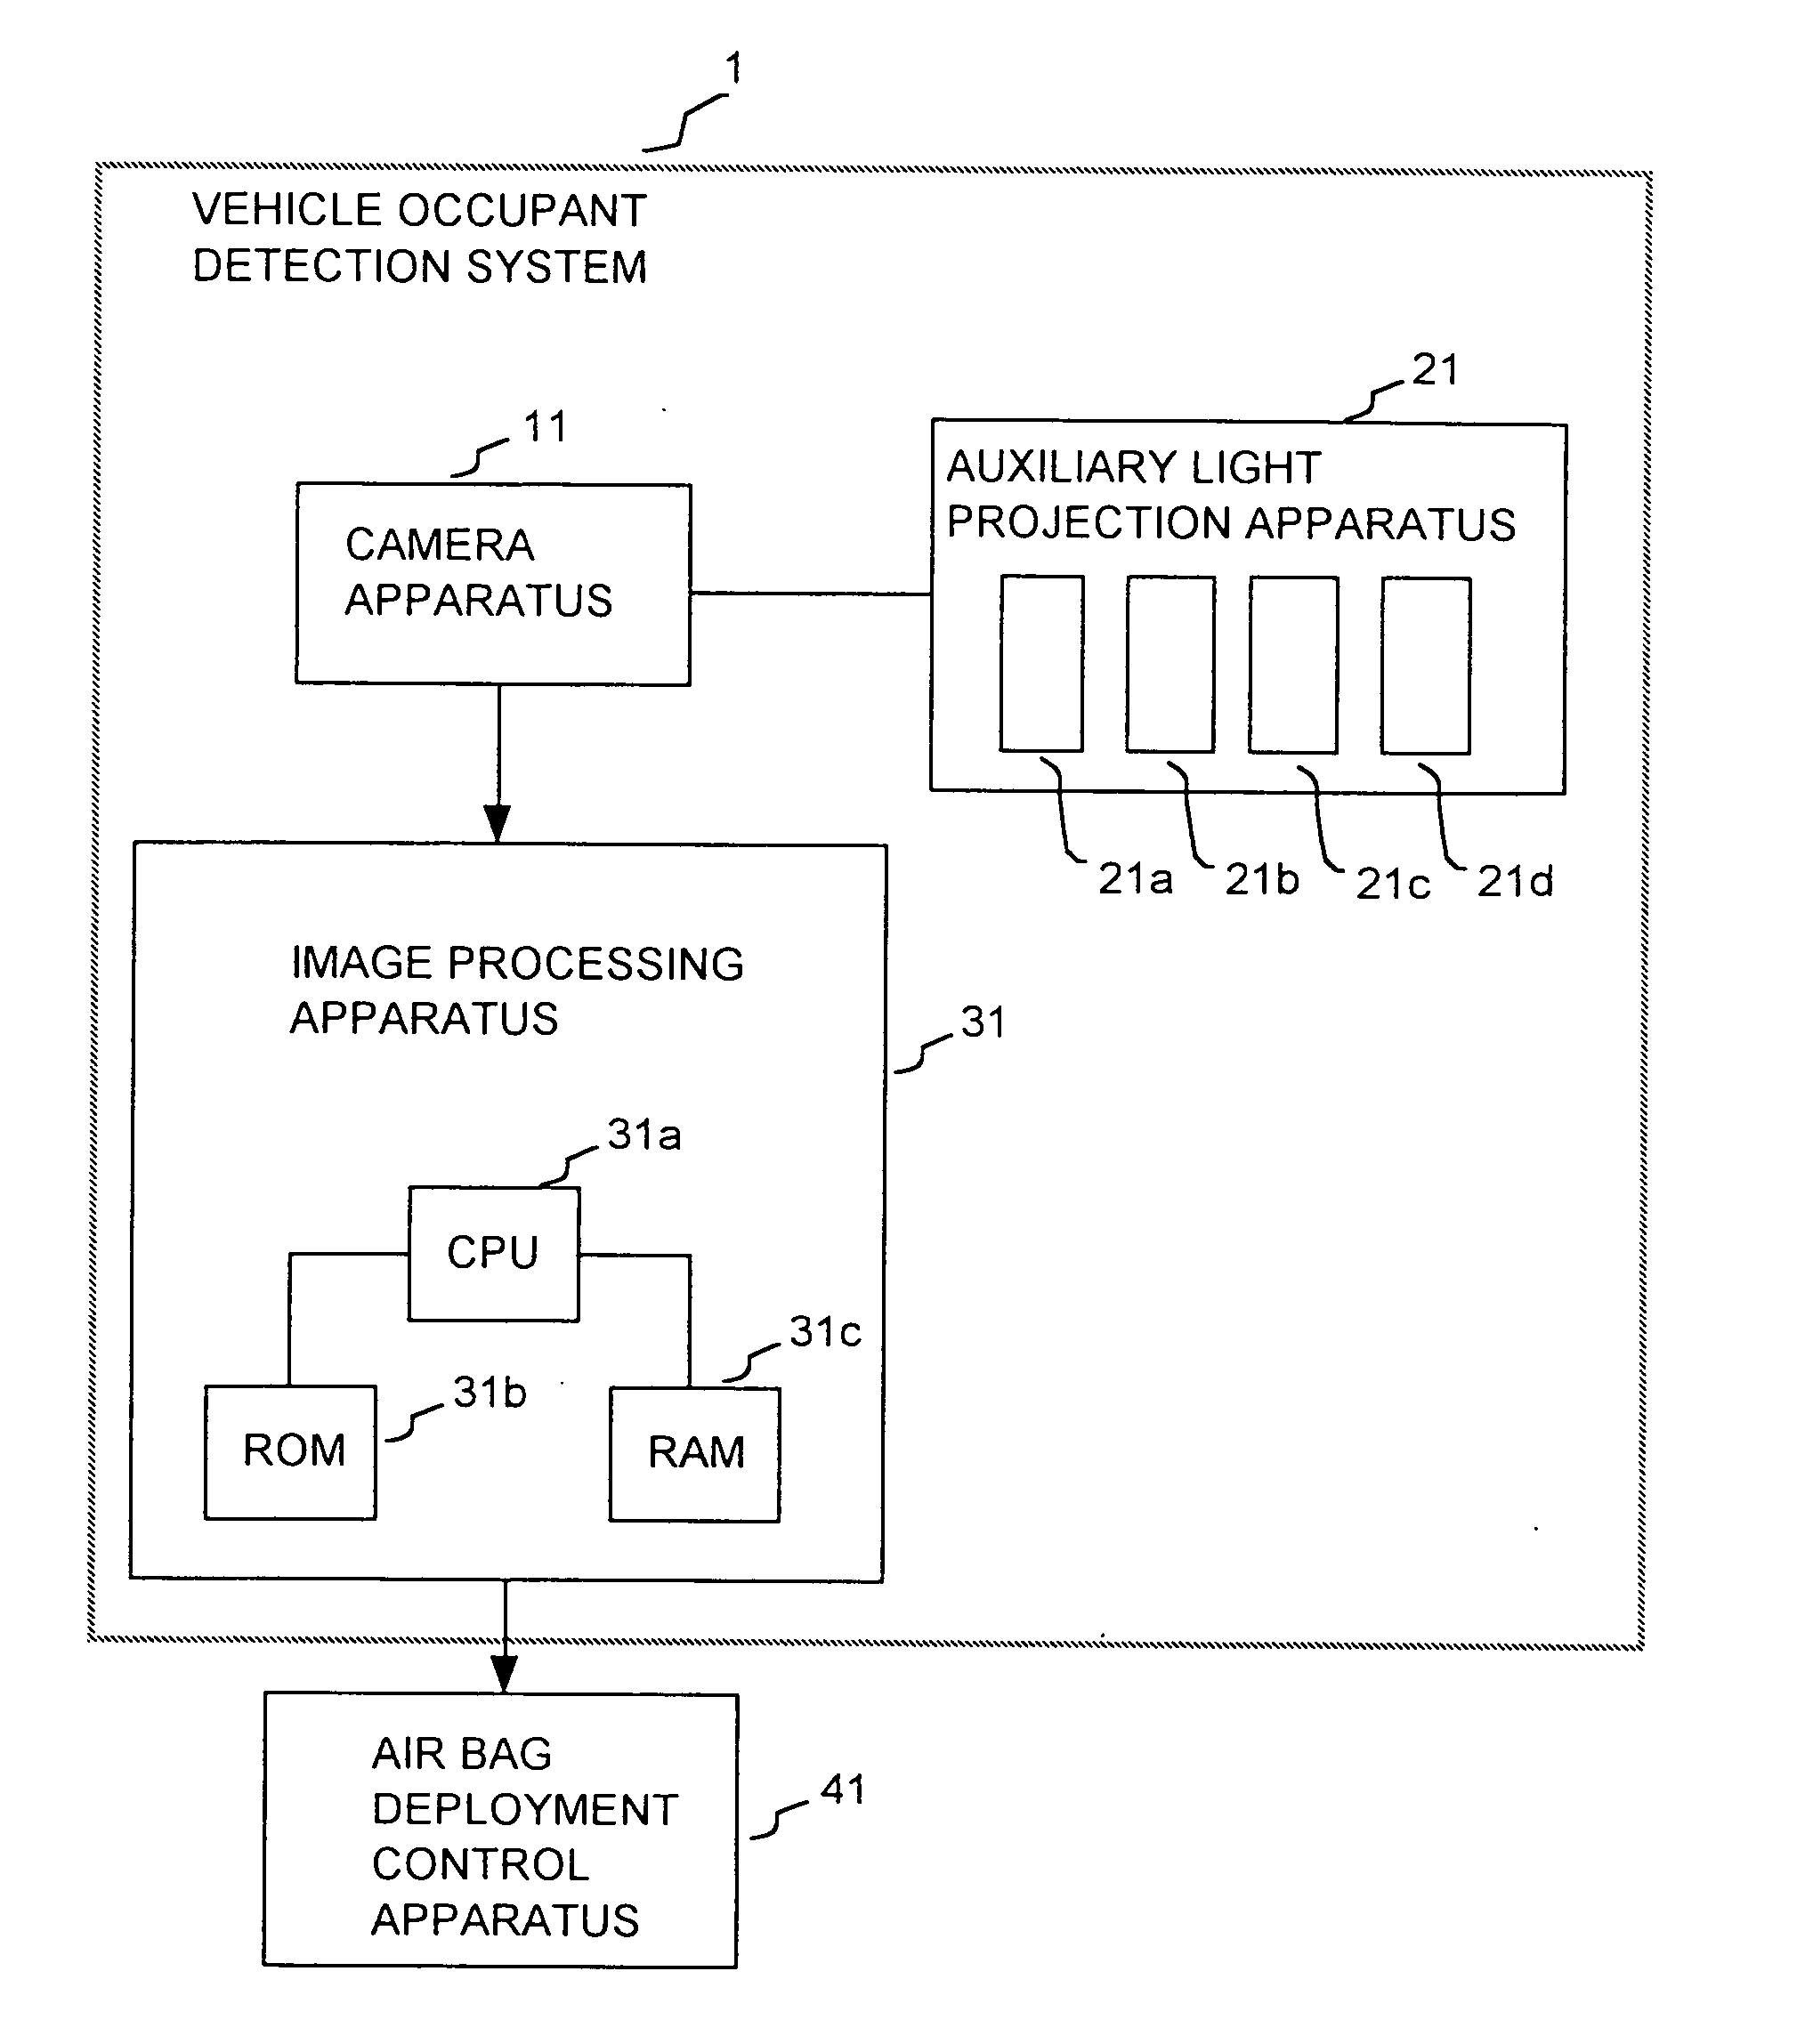 Vehicle occupant detection apparatus for deriving information concerning condition of occupant of vehicle seat